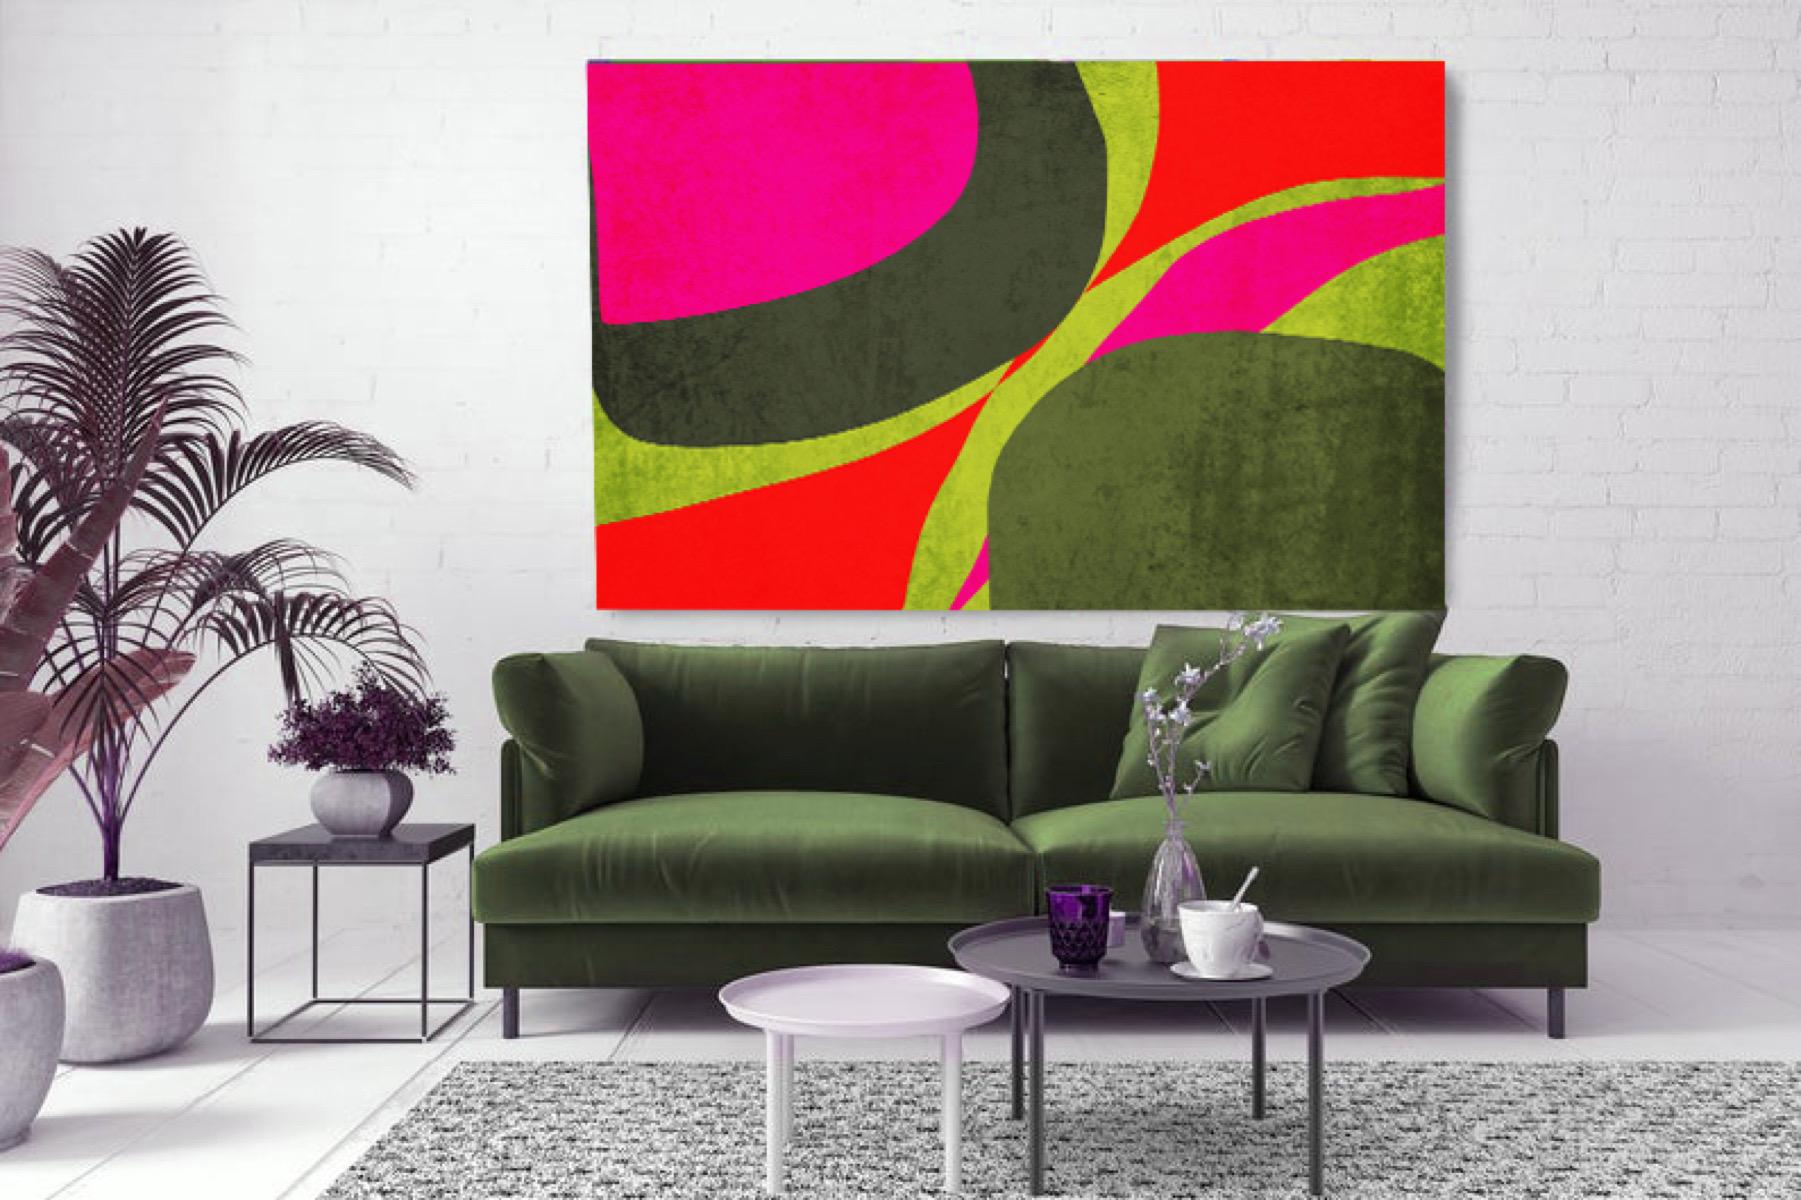  Midcentury Green  Red 21-04-55 Mixed Media Painting on Canvas 40H X 60W' - Mixed Media Art by Irena Orlov